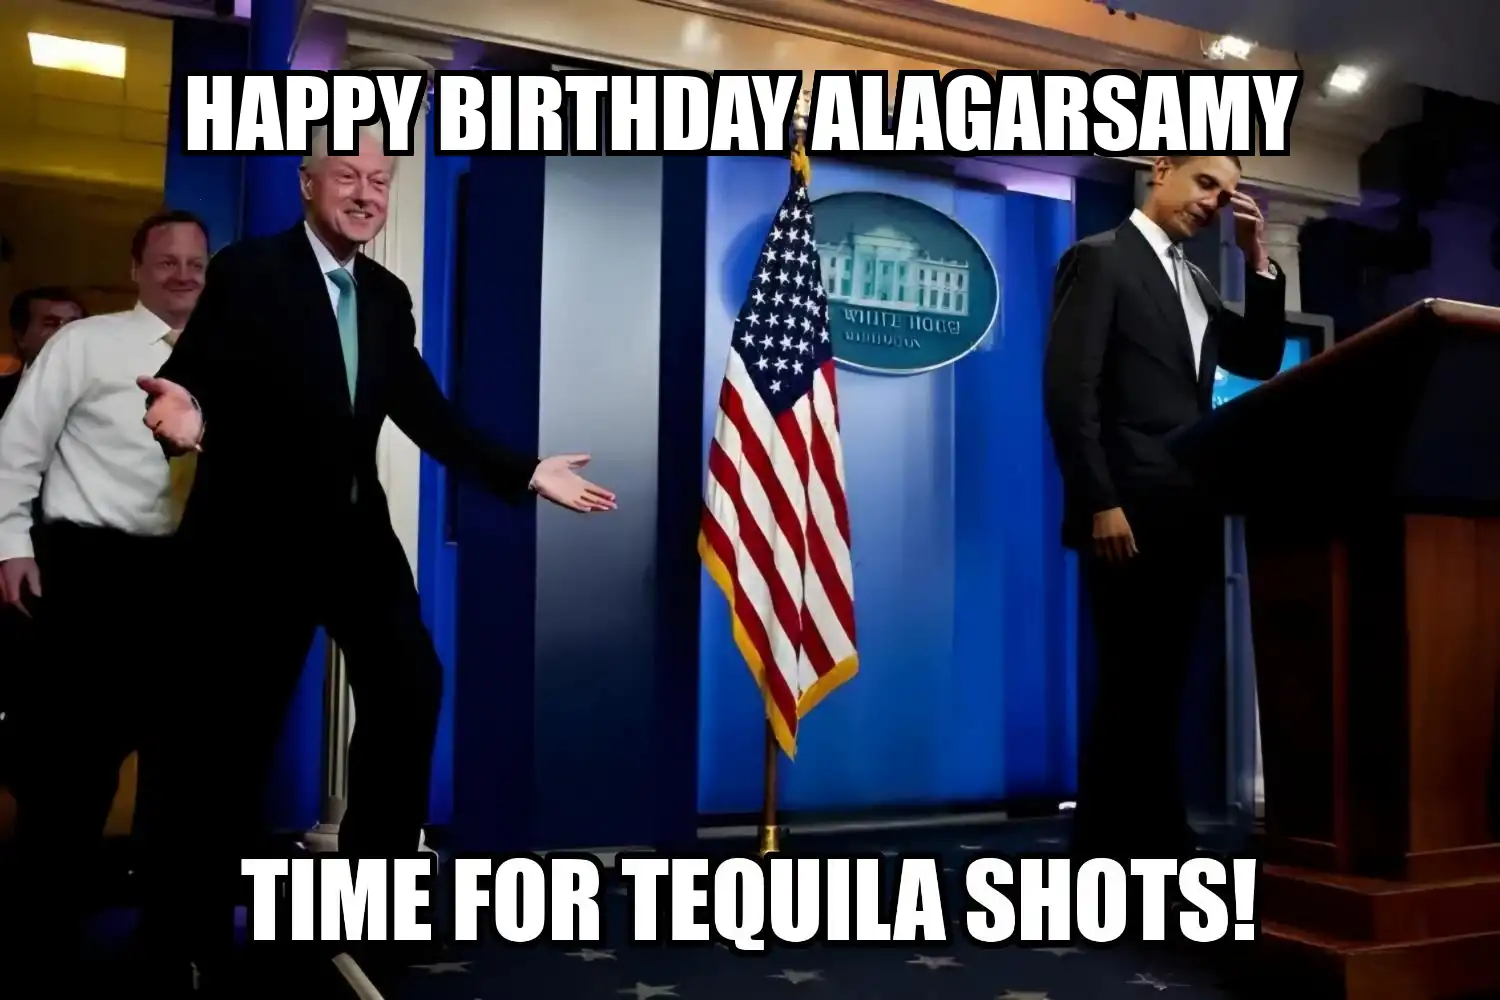 Happy Birthday Alagarsamy Time For Tequila Shots Memes